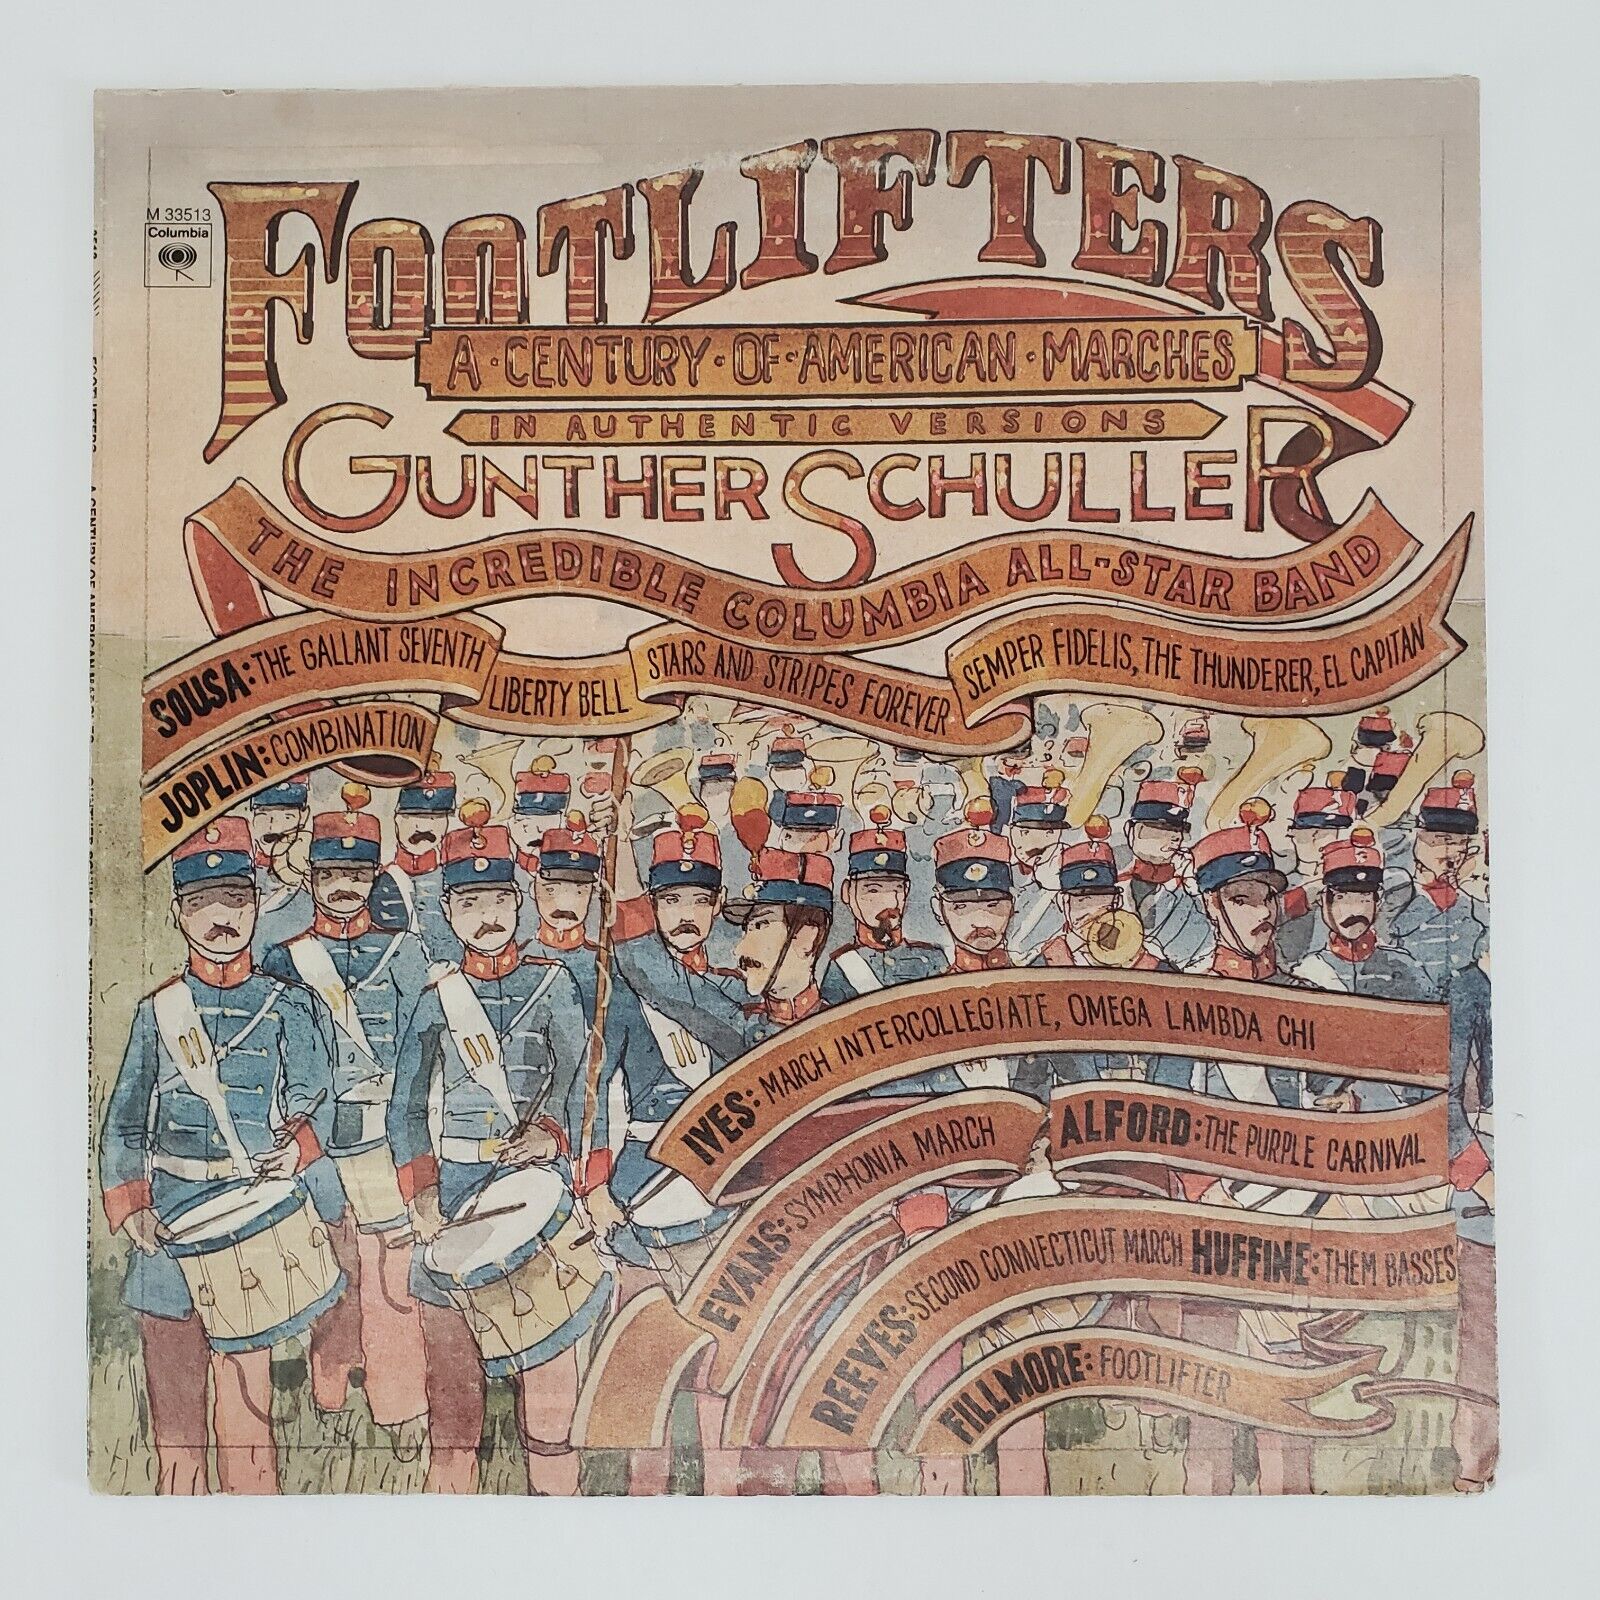 Gunther Schuller Footlifters A Century of American Marches M33513 Columbia NM